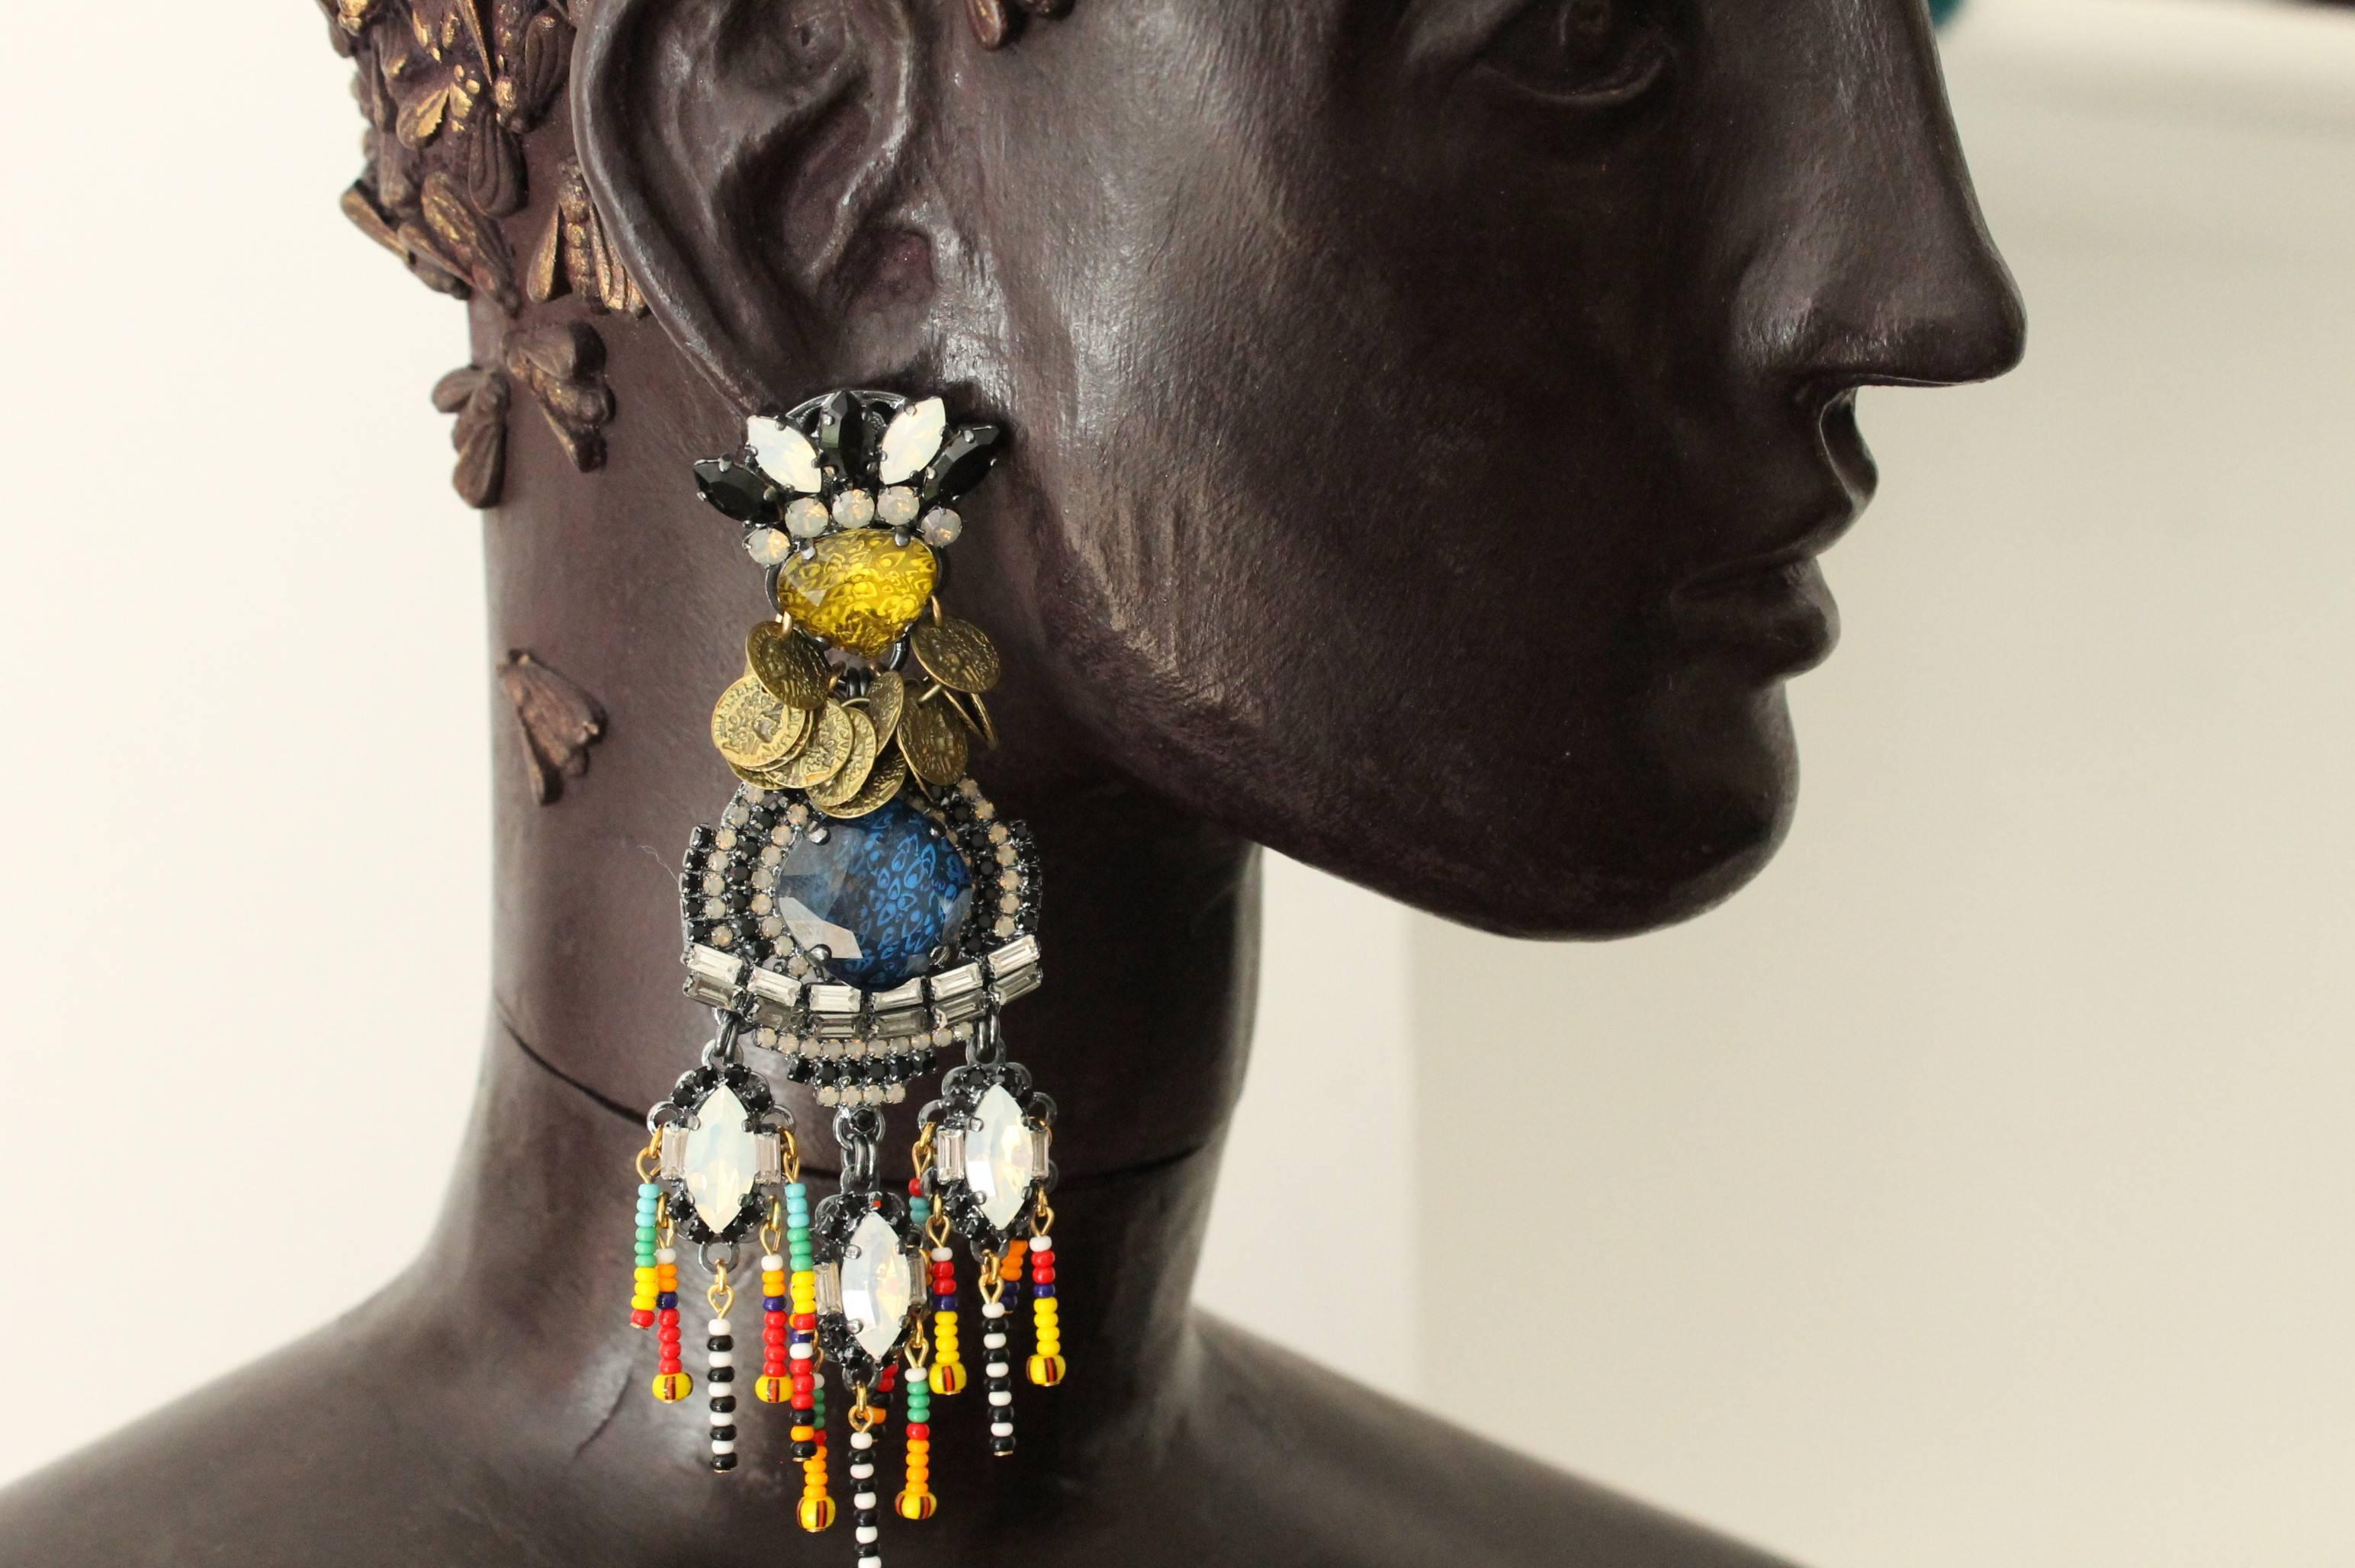 Stunningly beautiful statement drop earrings, lavishly embellished with hand-enamelled white, yellow, blue, black and clear Swarovski crystals; brass coins and rainbow-coloured seed beads.

Handmade for the past 25 years by Vicki’s small team of